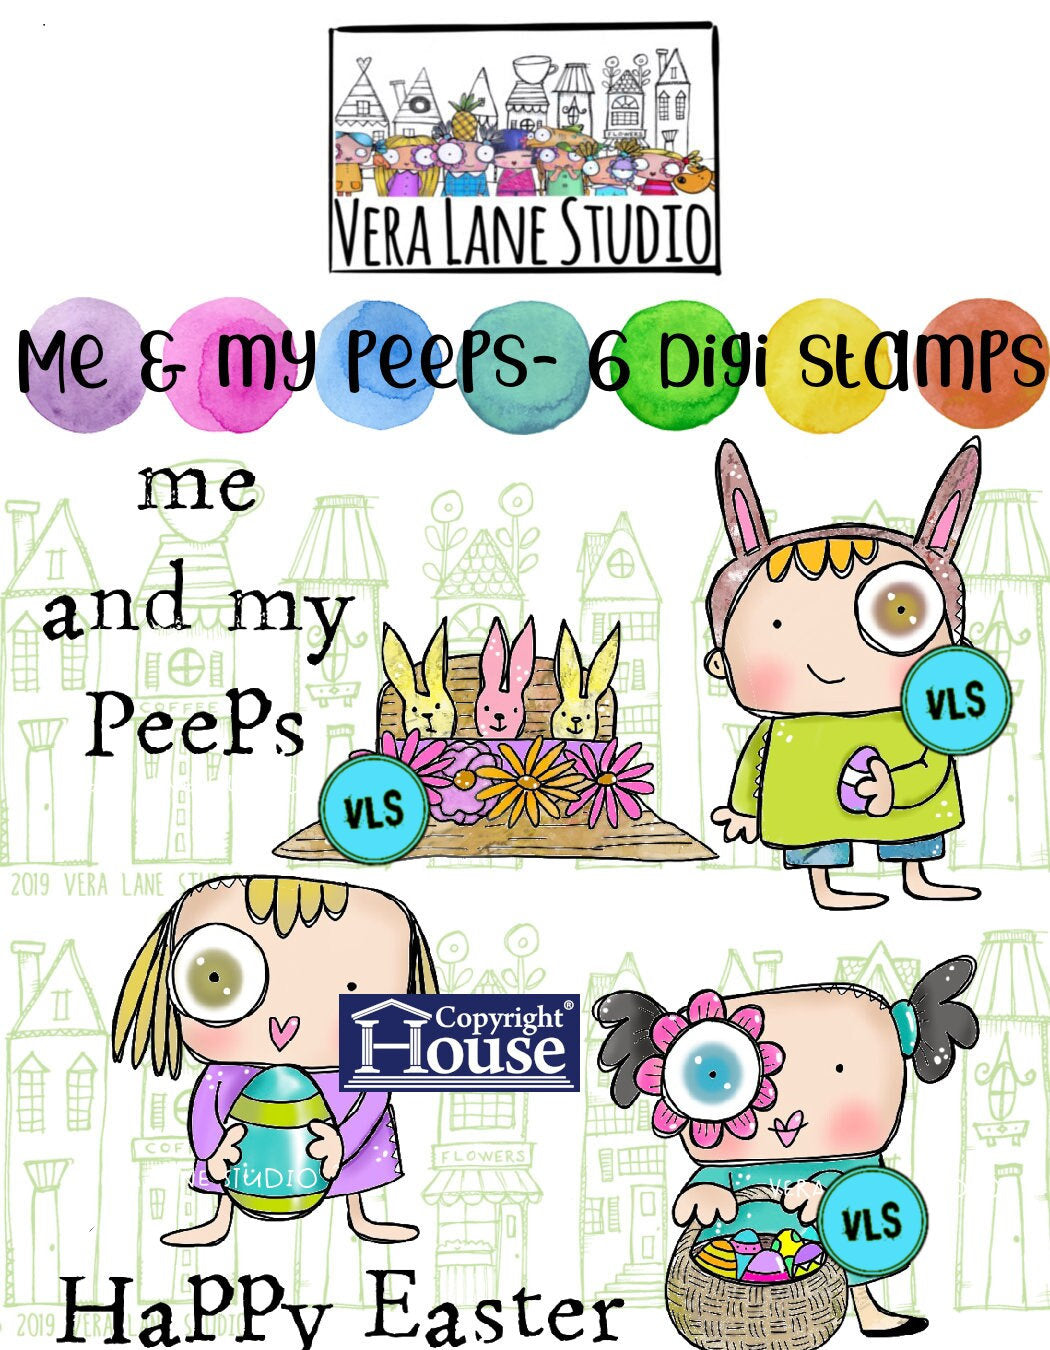 Me and my peeps - 6 digi stamps in jpg and png files